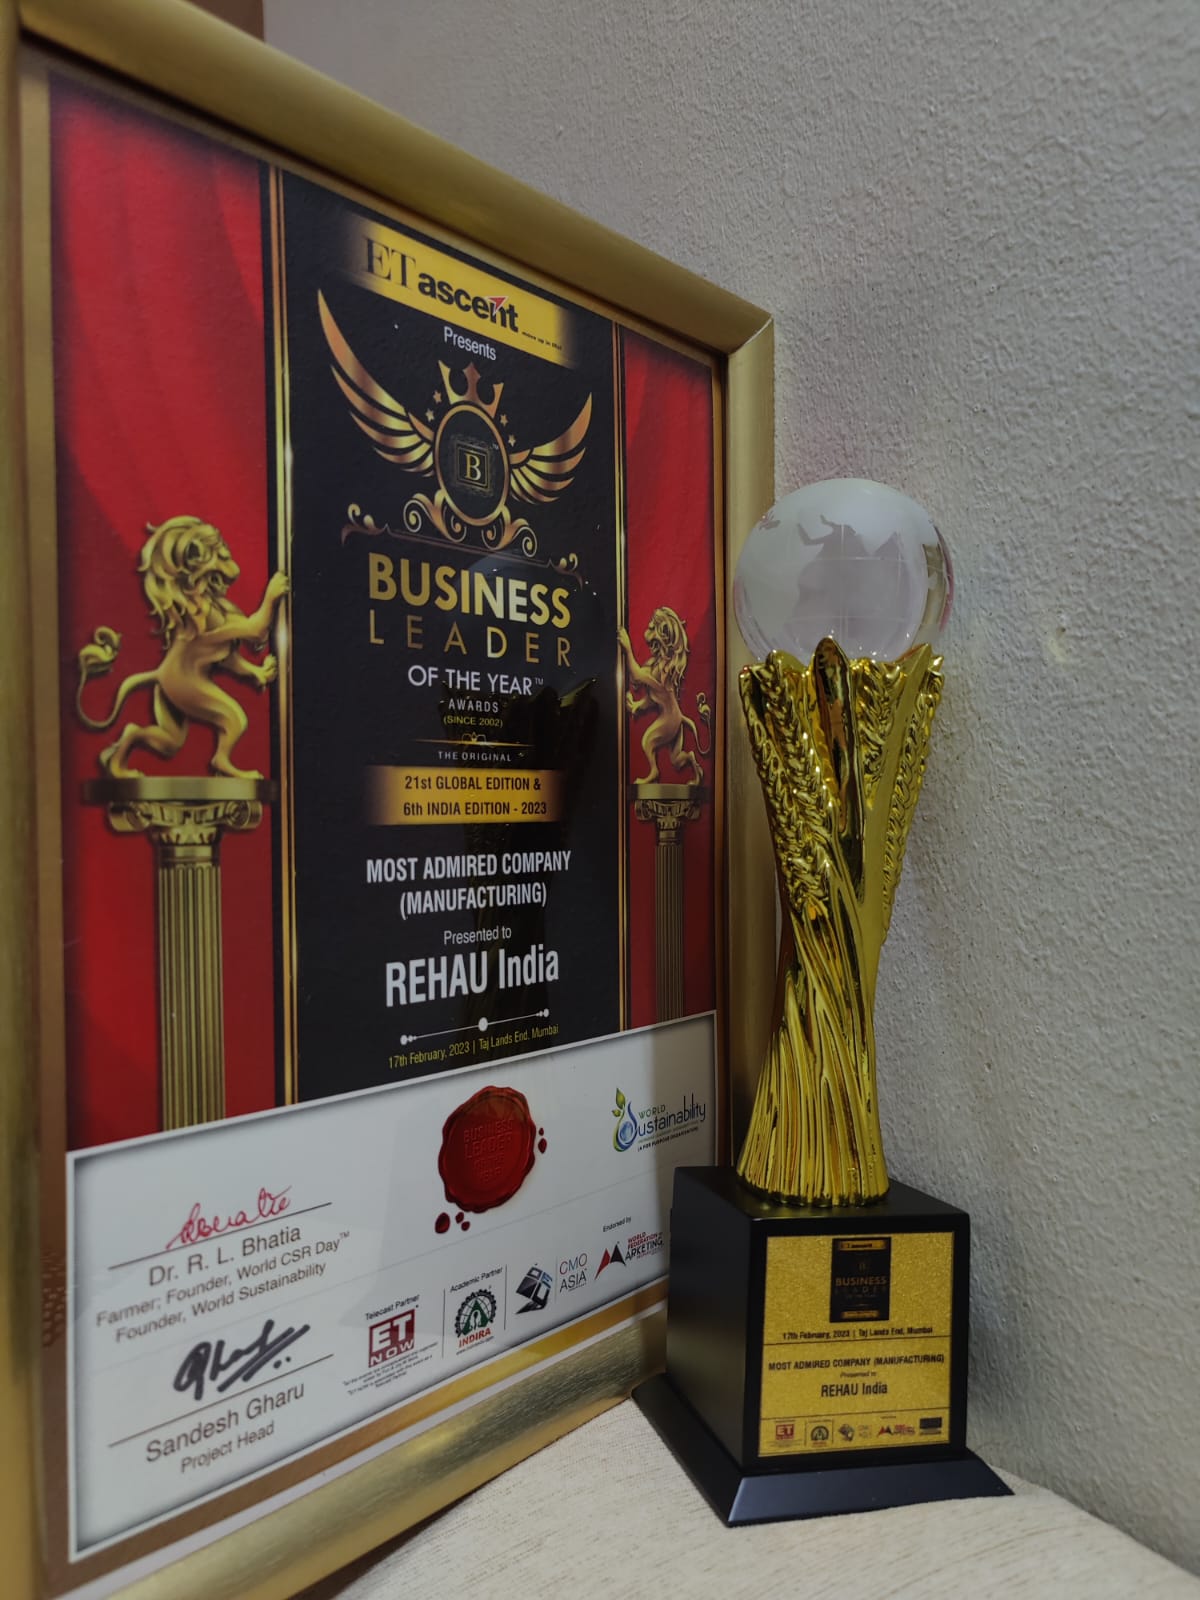 REHAU, polymer based solutions company awarded with the title - most admired company